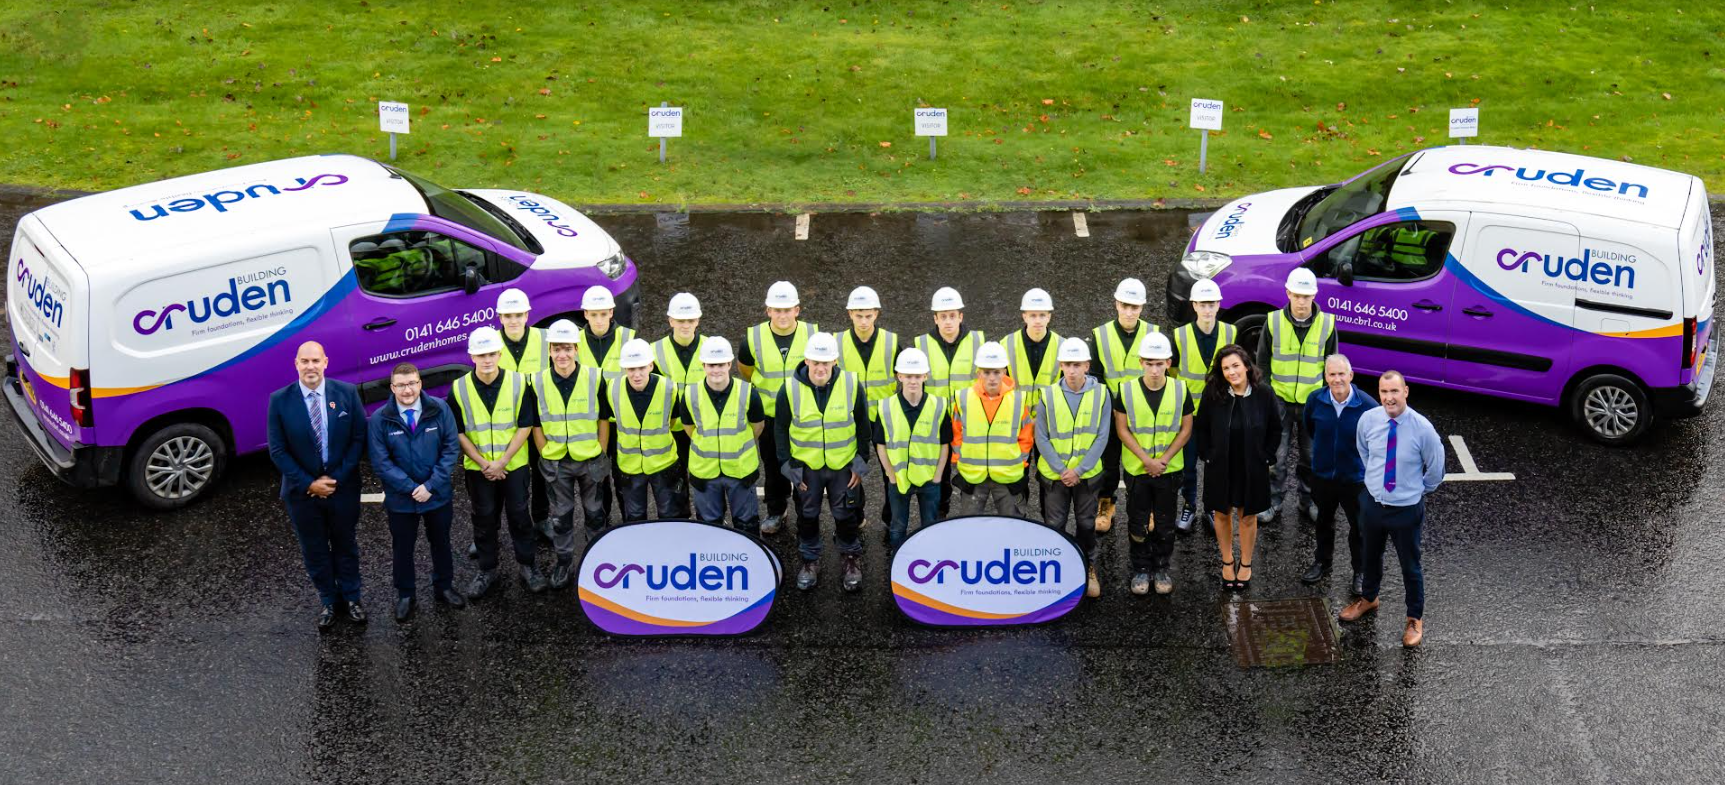 Cruden welcomes 27 apprentices and trainees on board